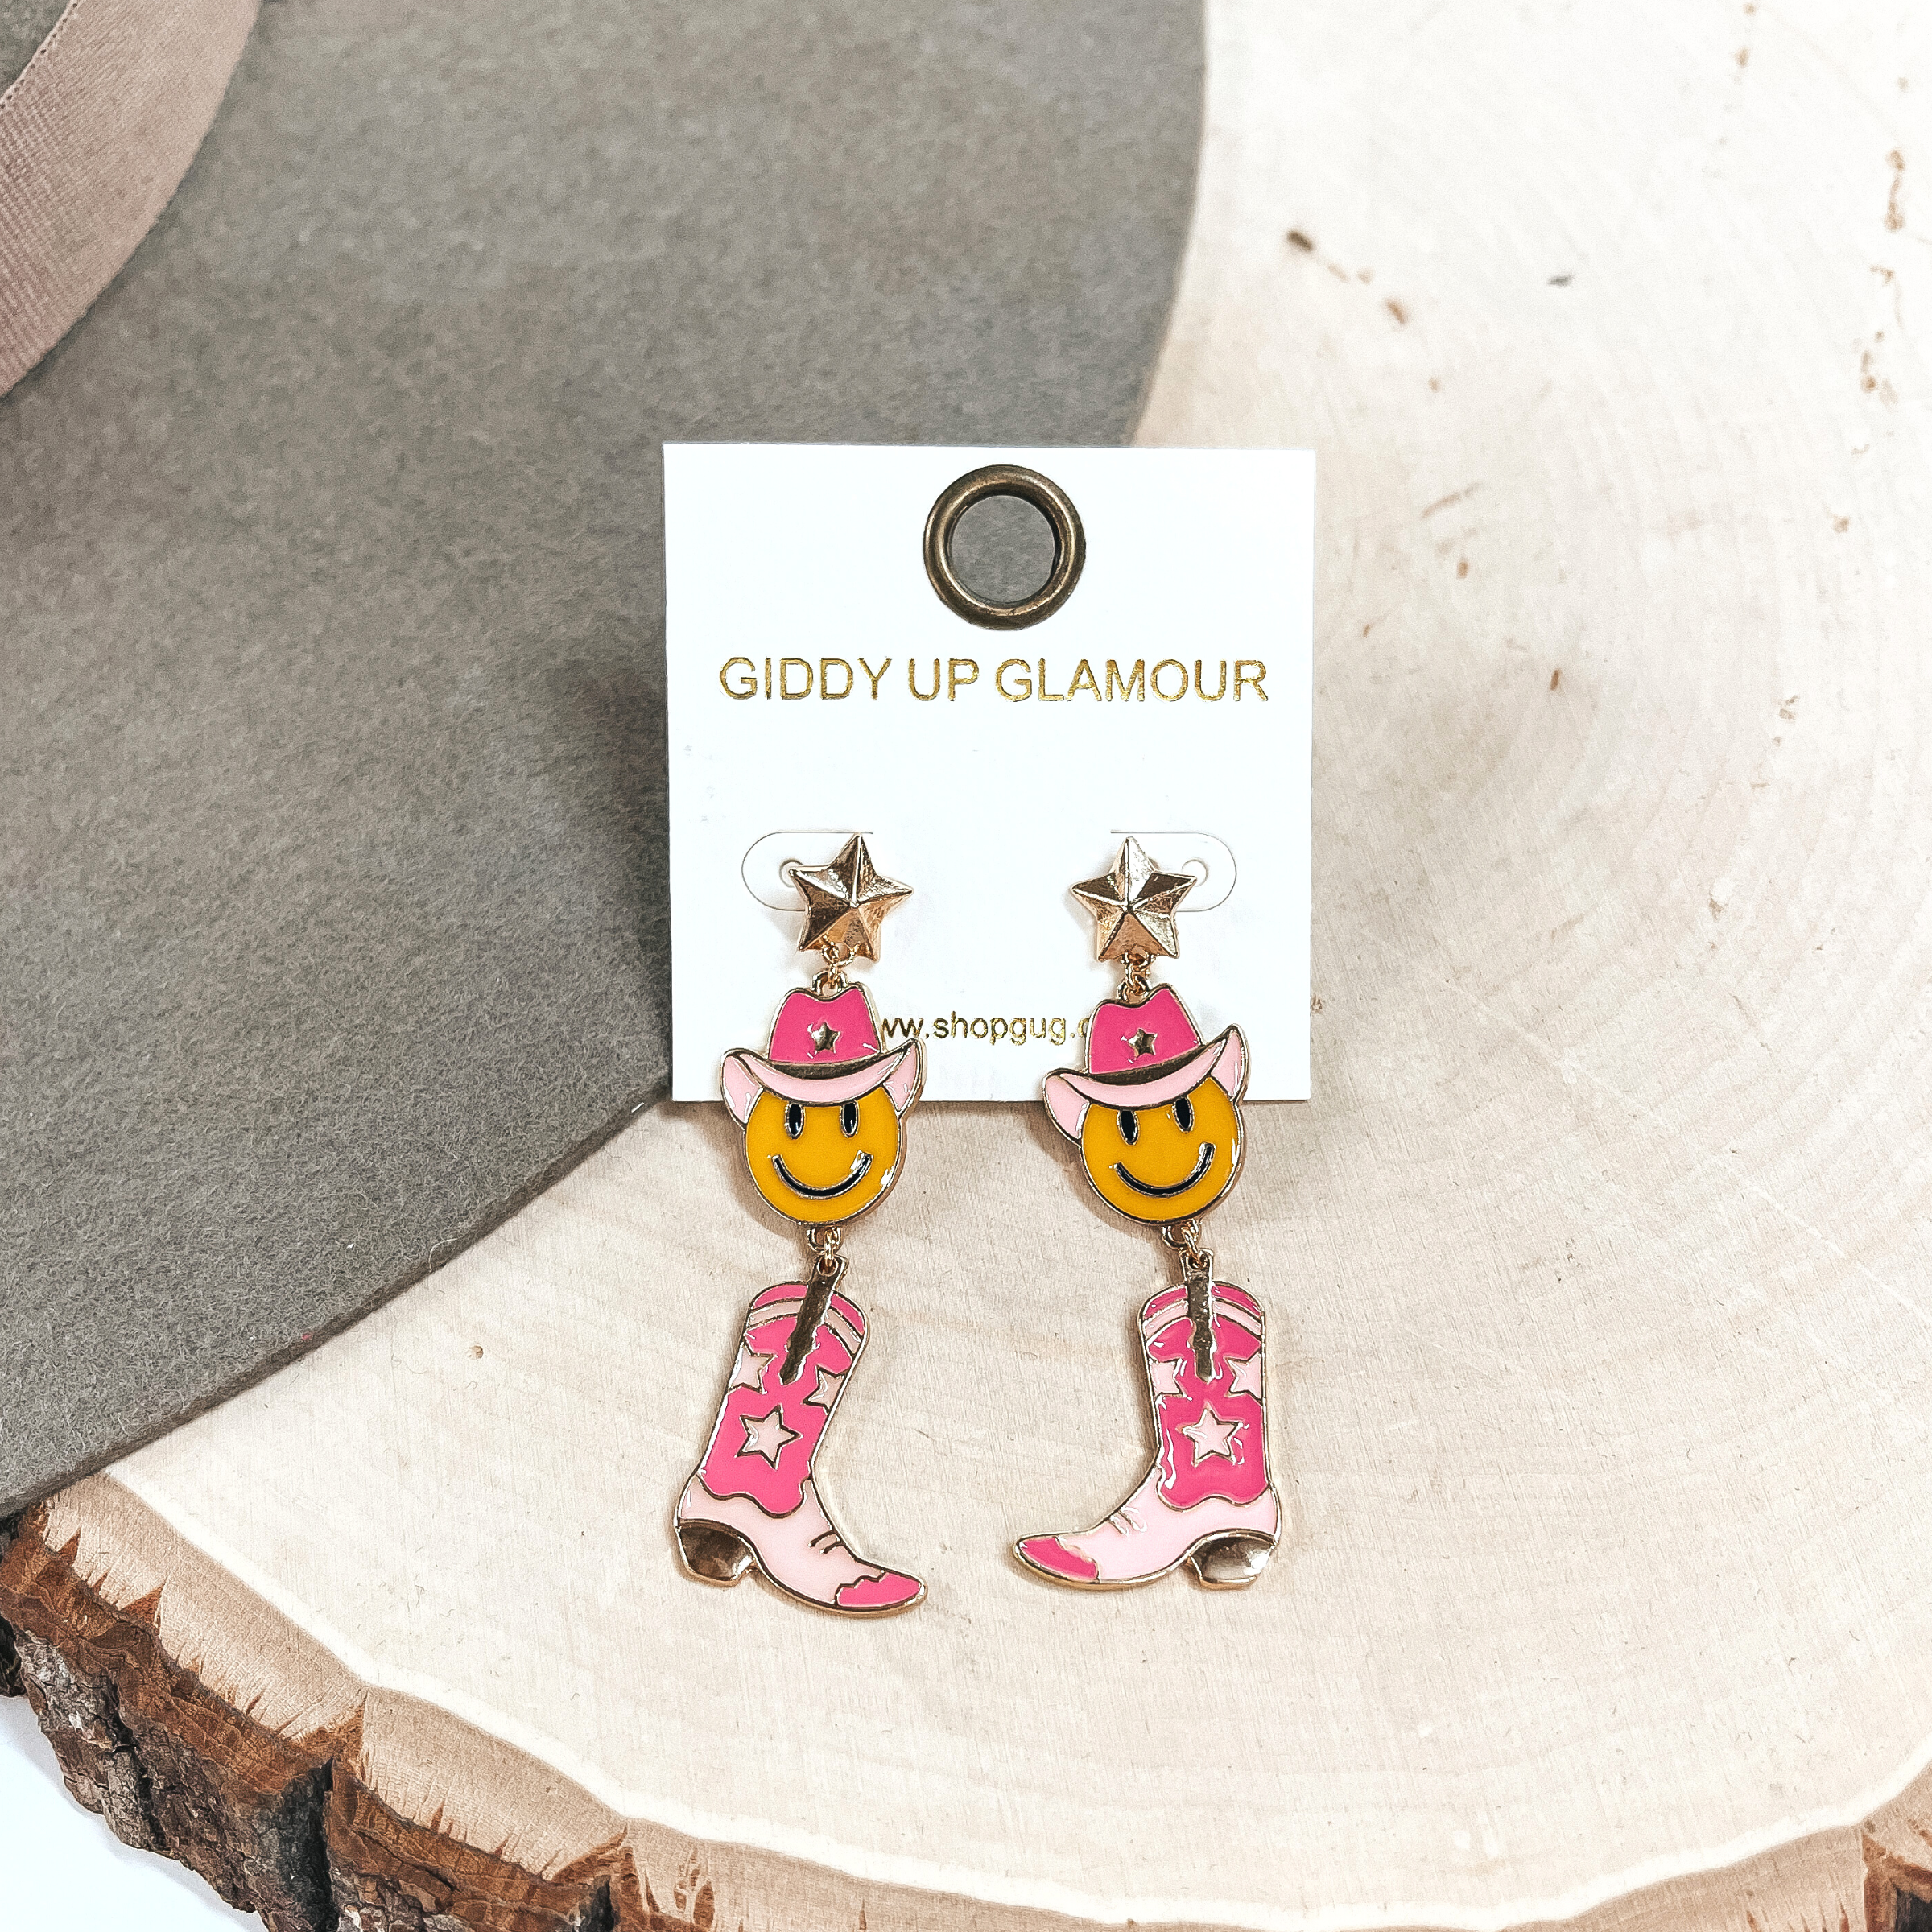 On The Fly Gold Tone Star Post Earrings with Happy Face Cowboy and Boot Pendant Earrings in Pink - Giddy Up Glamour Boutique